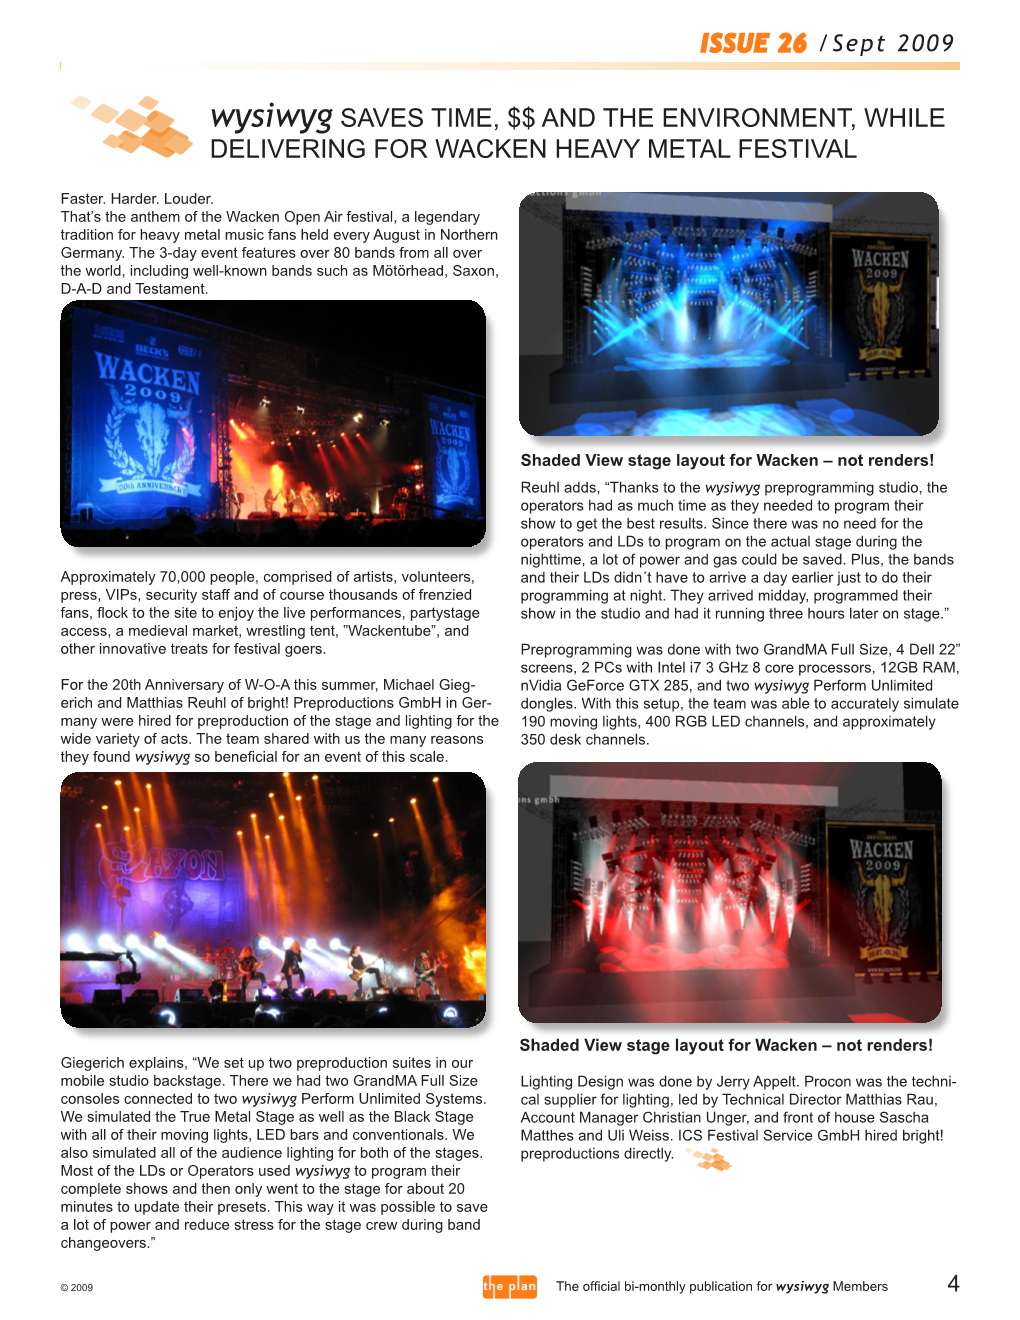 Wysiwyg Saves Time, $$ and the Environment, While Delivering for Wacken Heavy Metal Festival